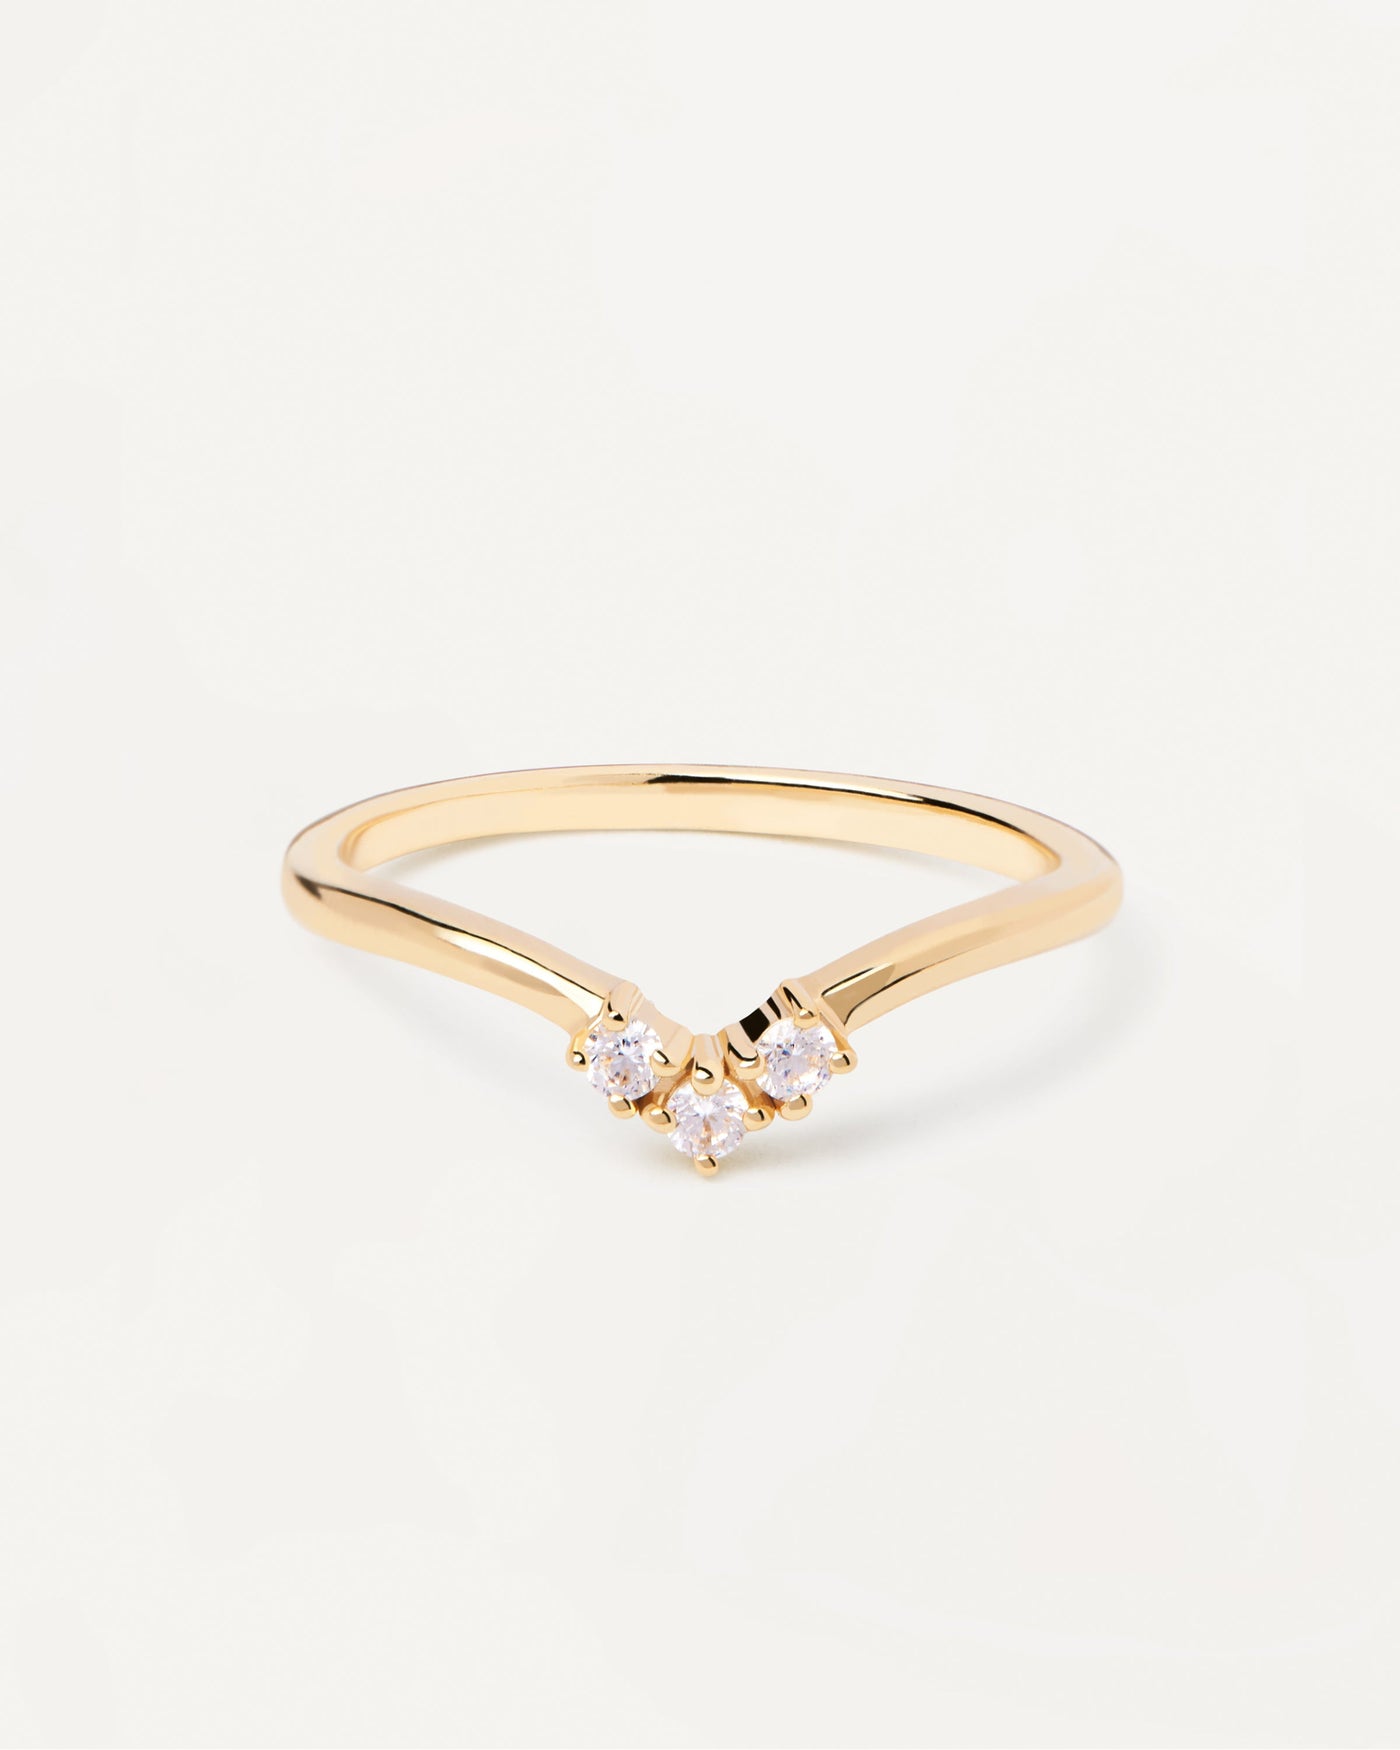 2023 Selection | Mini Crown Ring. Dainty gold-plated ring with 3-zirconia in triangle shape. Get the latest arrival from PDPAOLA. Place your order safely and get this Best Seller. Free Shipping.